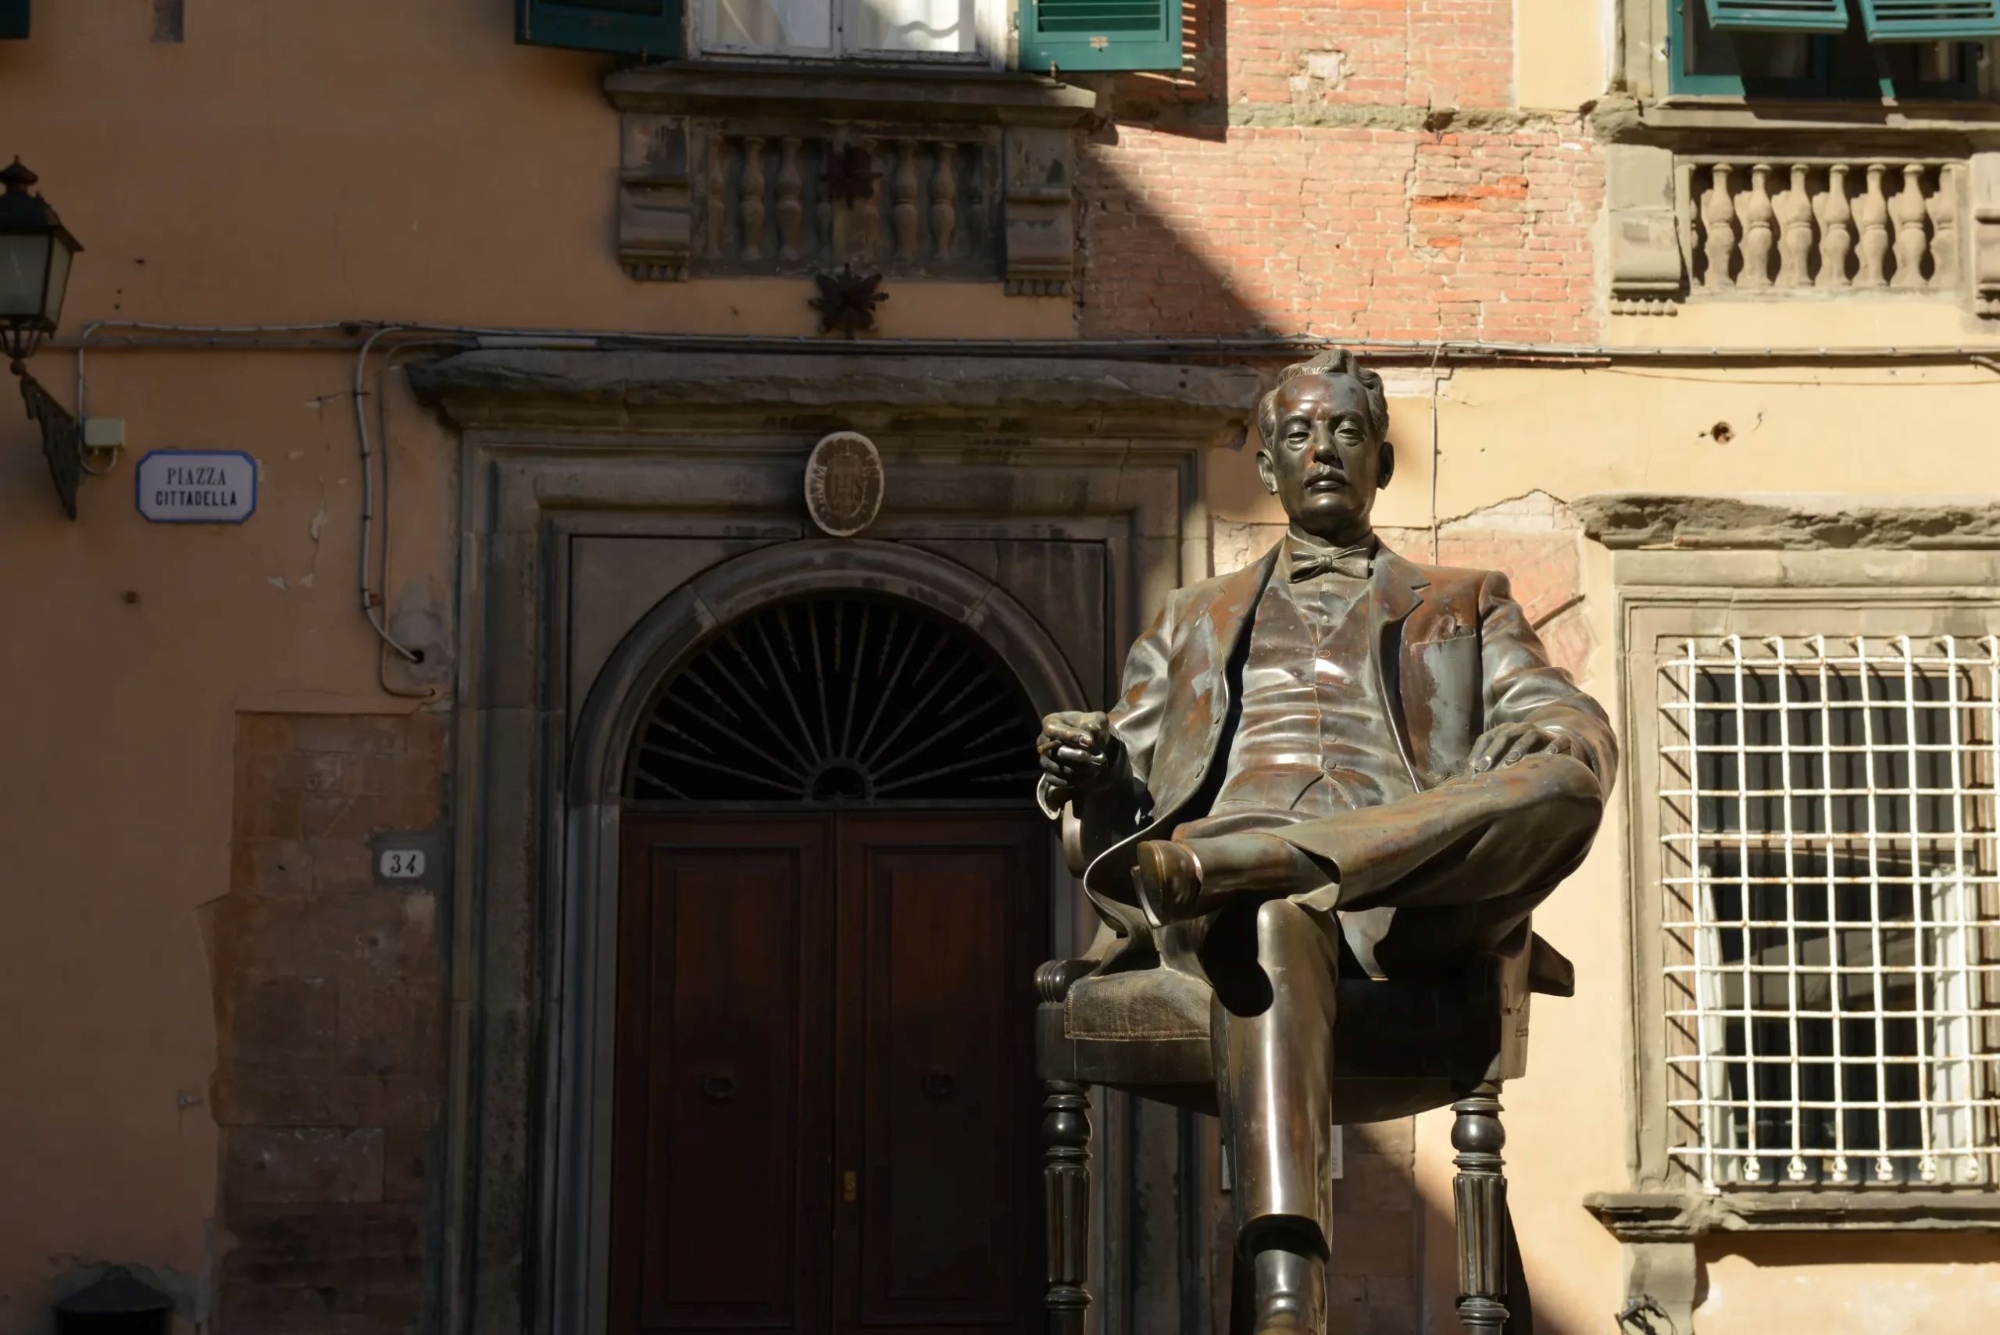 A tour of the city of Lucca to discover the key places in Giacomo Puccini's life